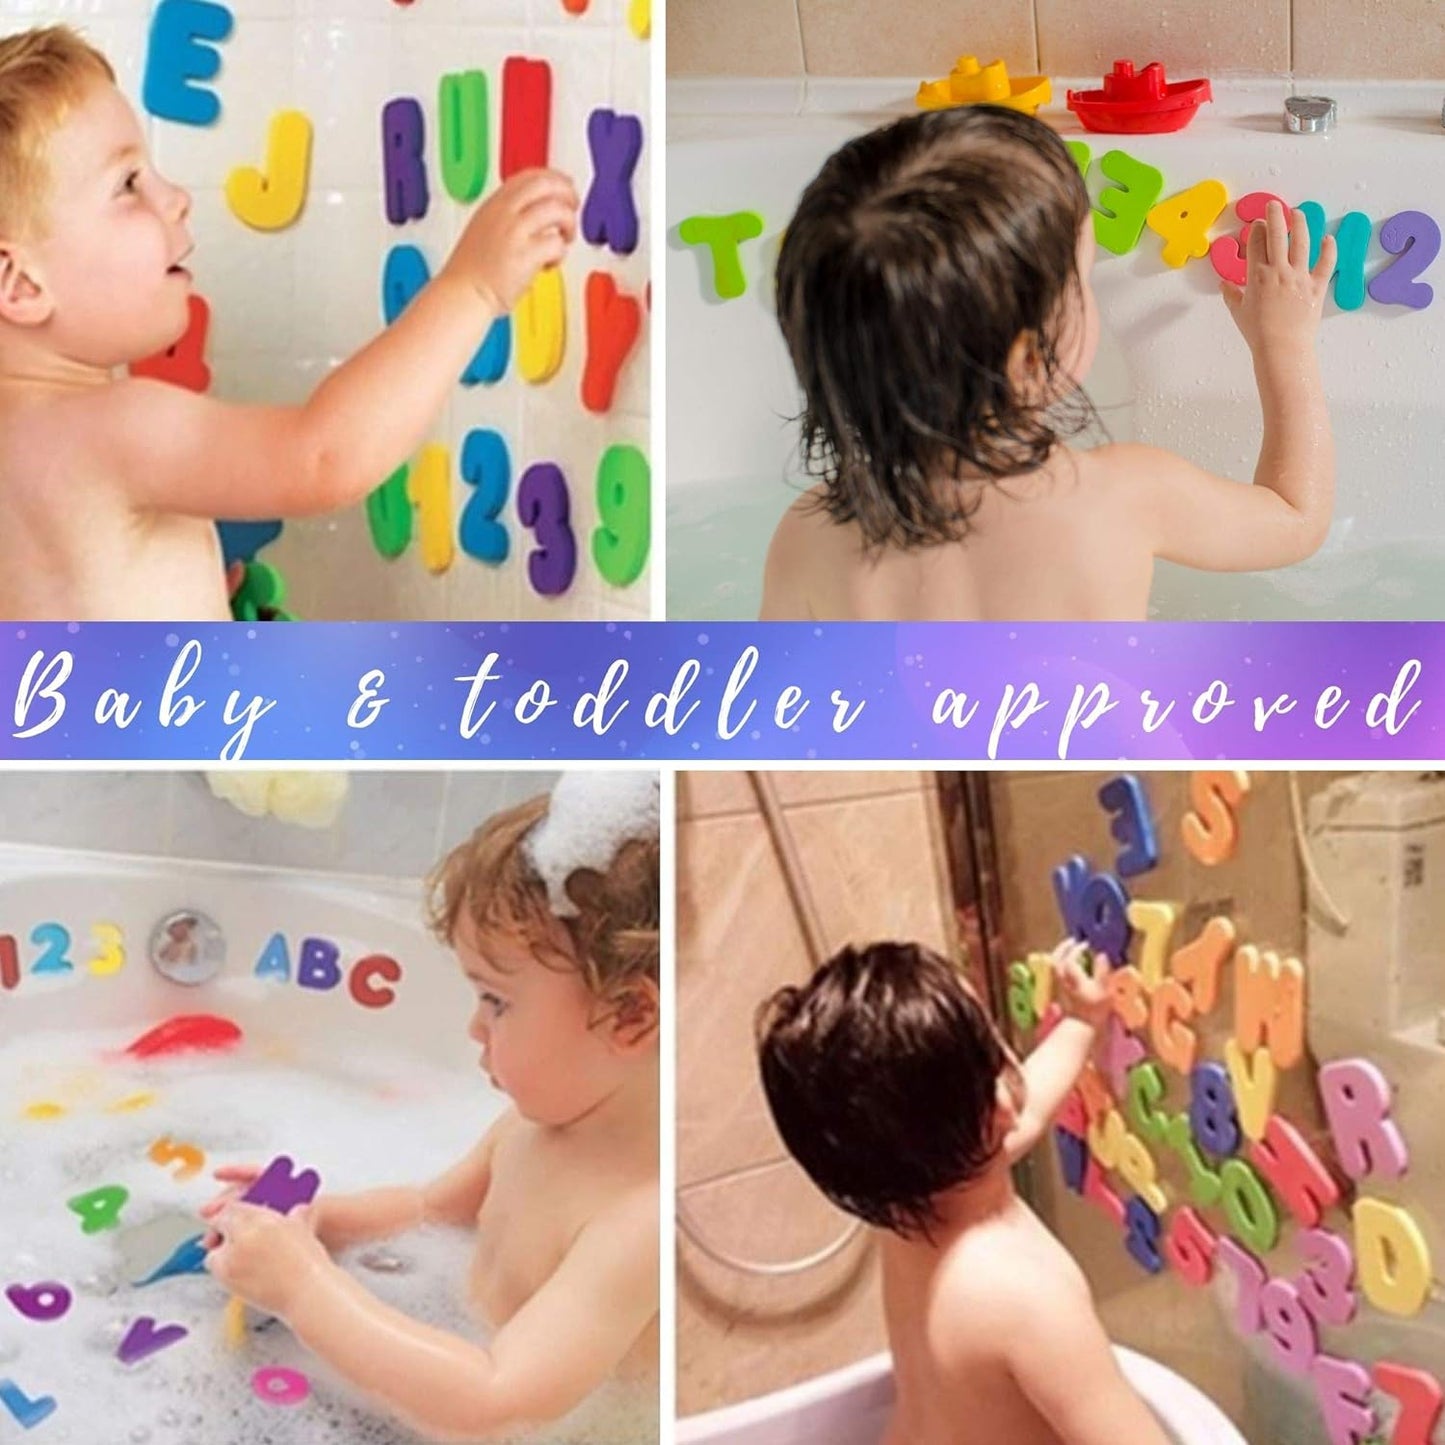 Bath Toy Storage Jumbo+36 Eco-Safe Educational Foam Baby Bath Letters and Numbers|Bath Toy Organizer Mesh Net Shower Caddy for Baby Bath Toys for Toddlers 1-3| Quick Dry Bathroom Decor Bath Toy Holder